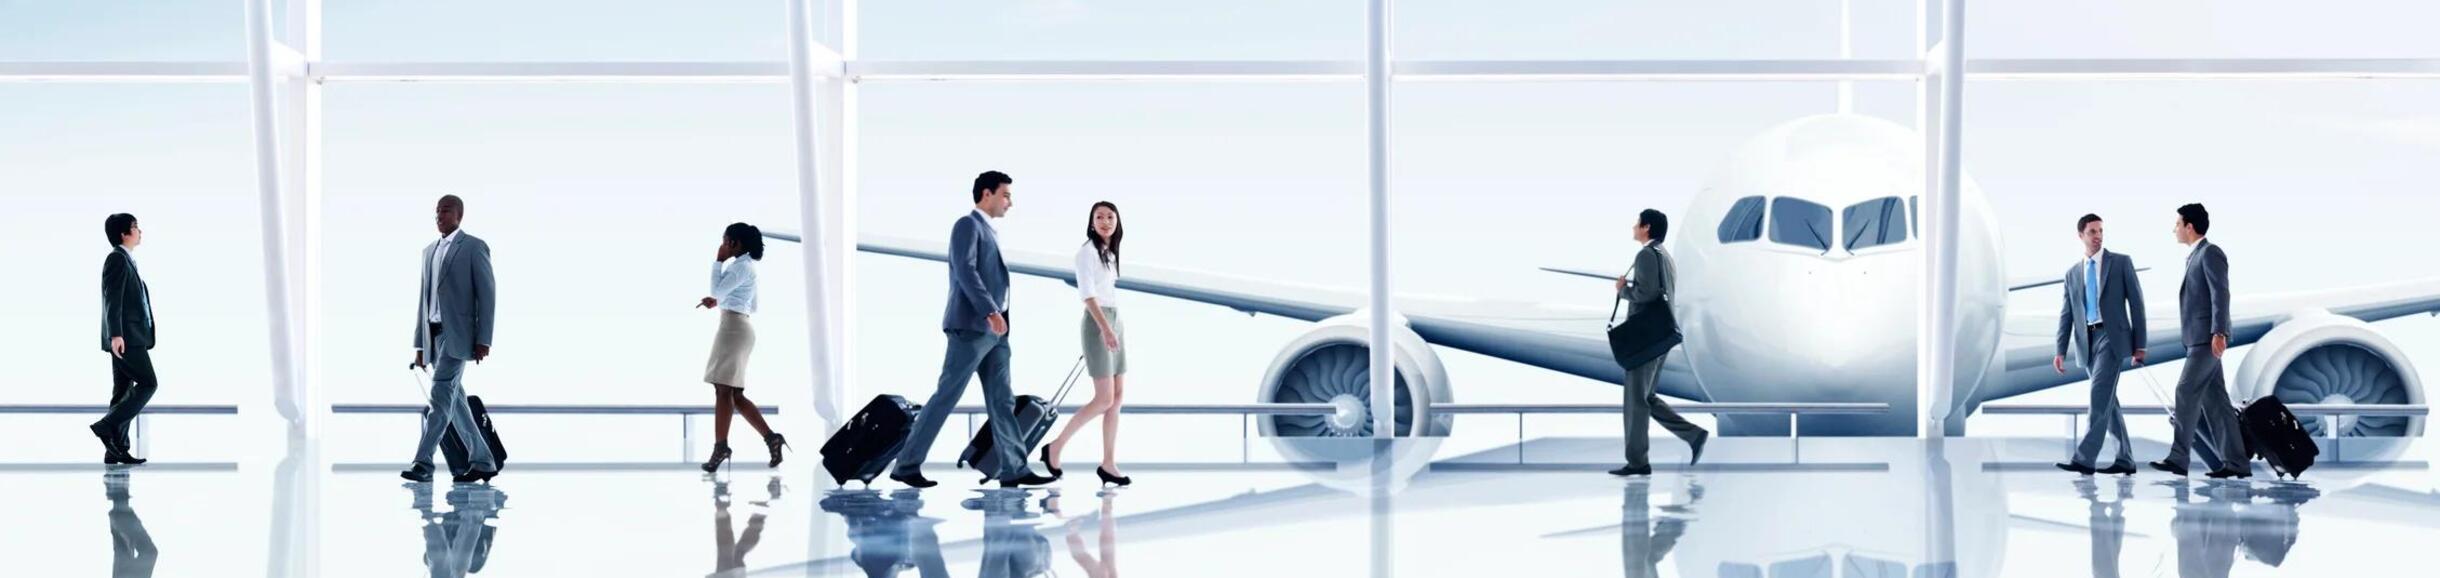 stylized photo of people walking through an airport concourse